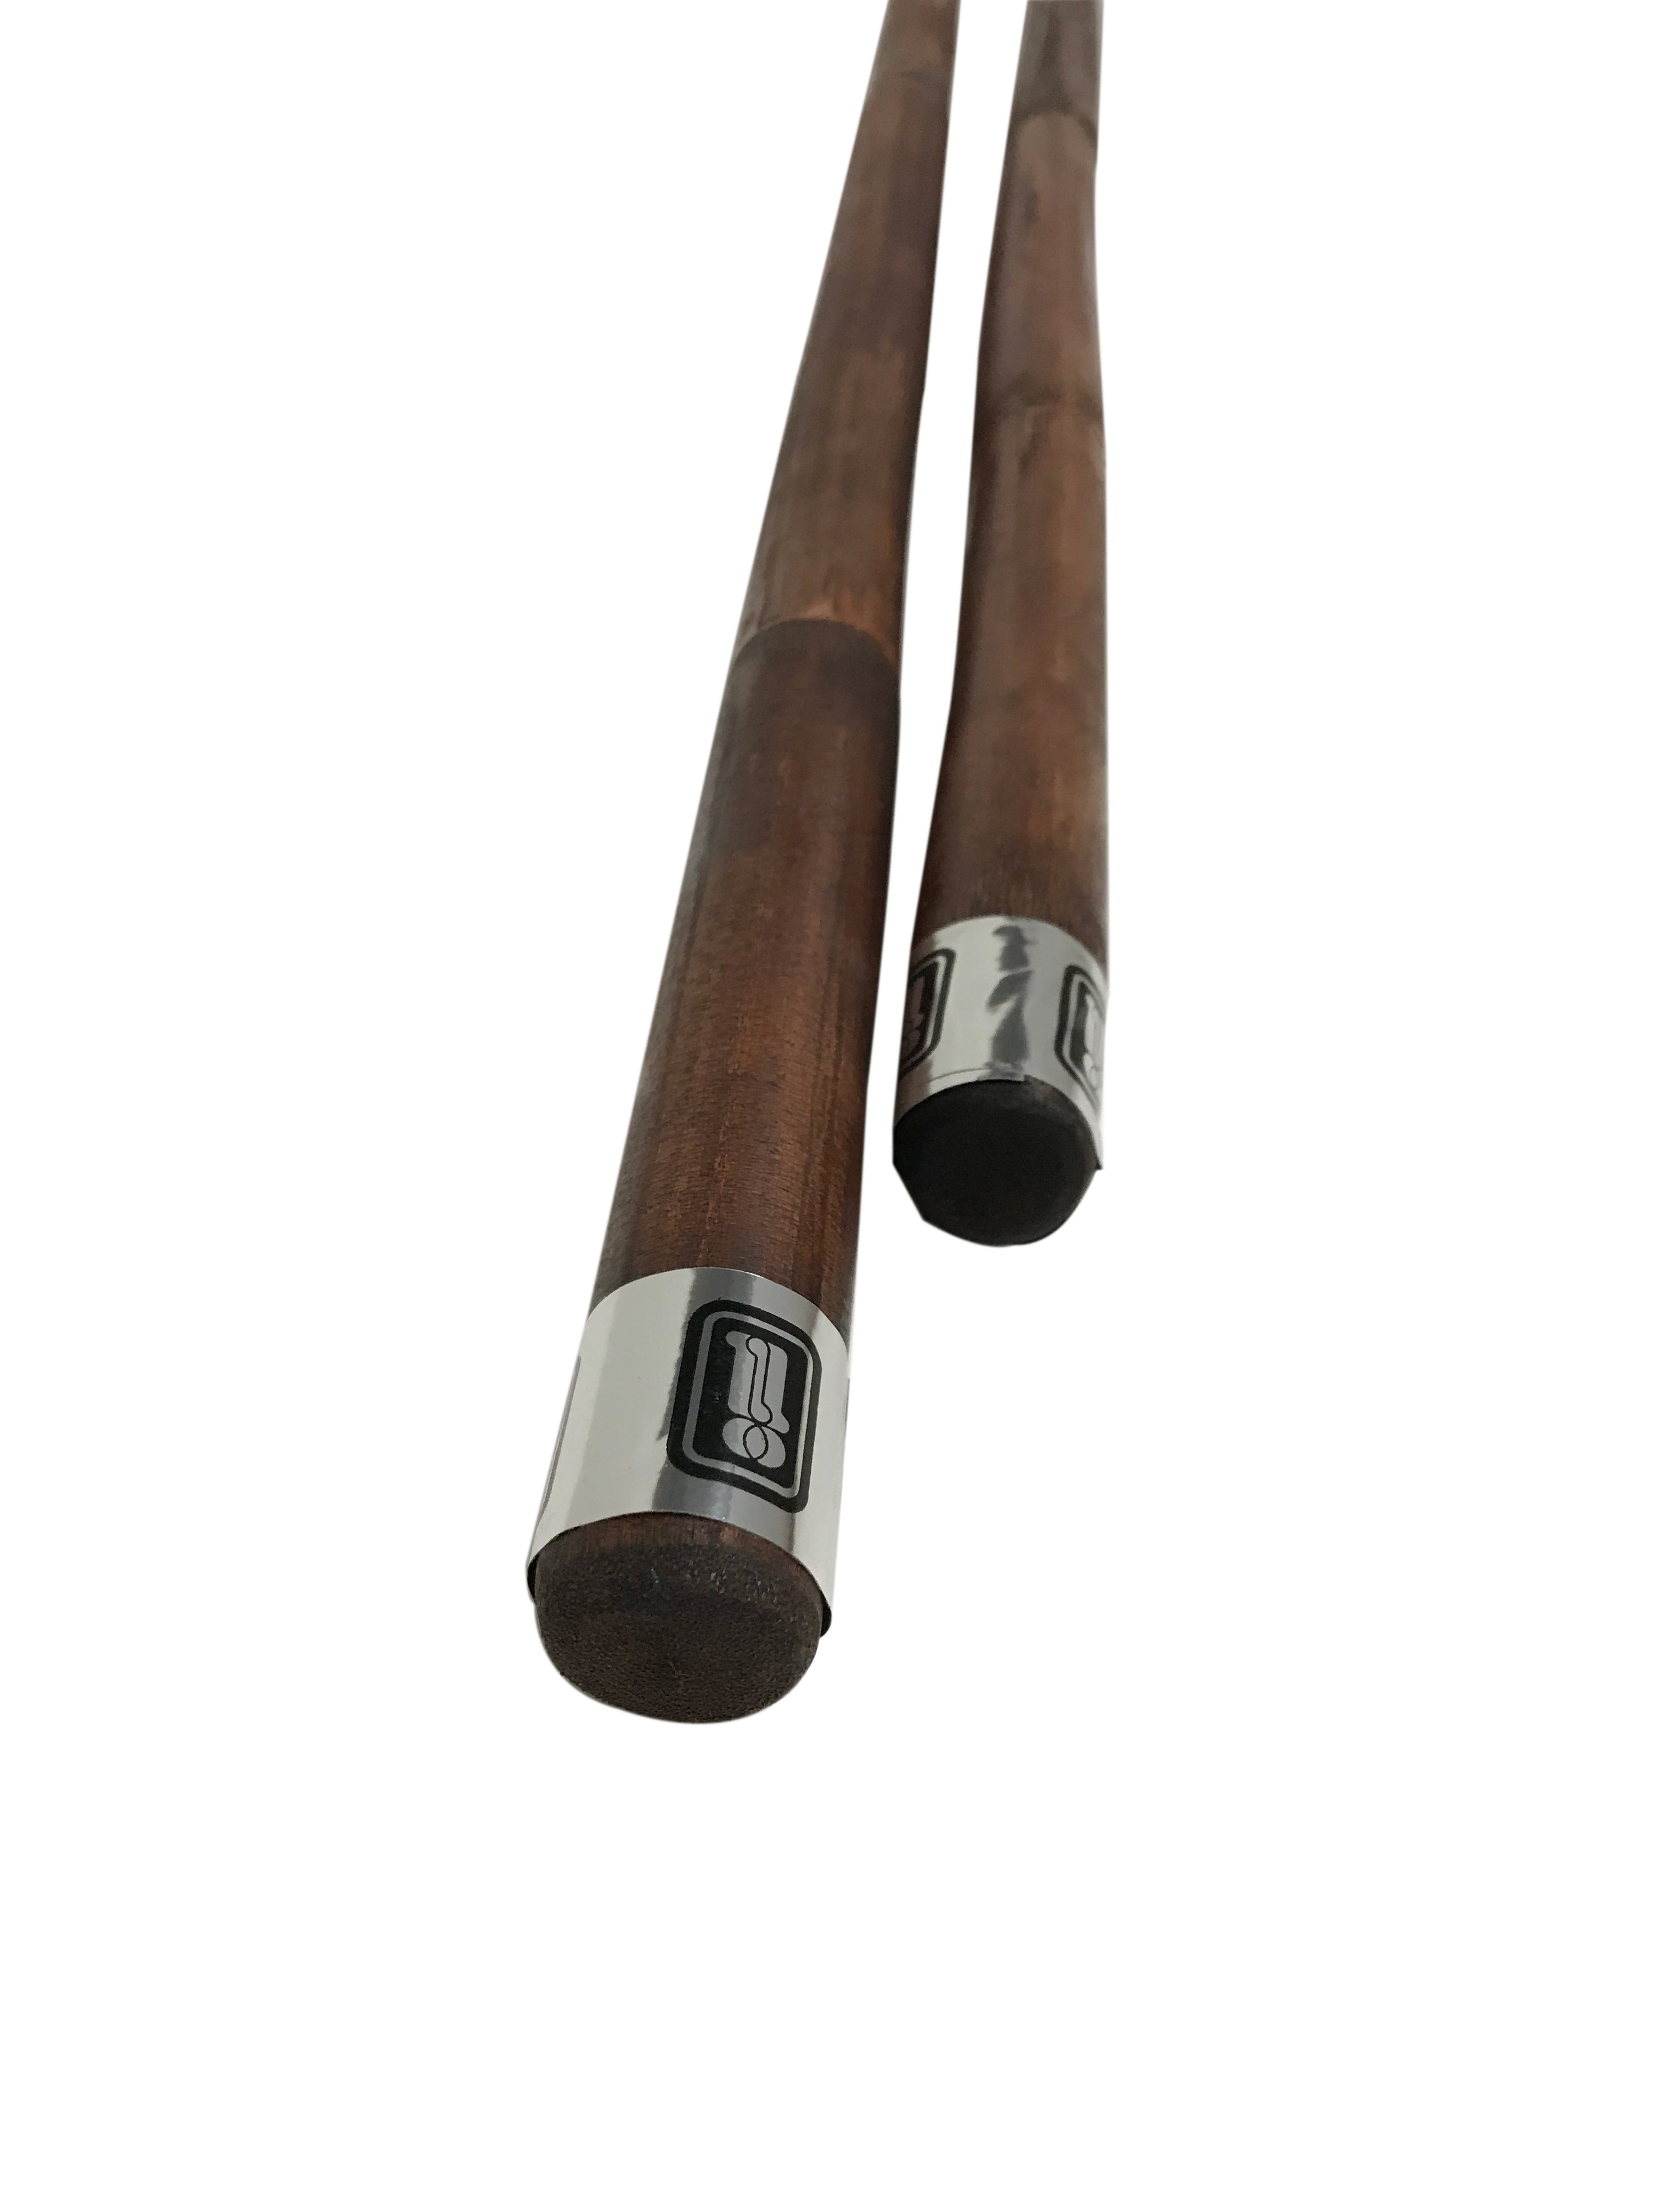 Pair BROWN Doce Pares Rattan Escrima Kali Arnis Fighting Stick Set Handcrafted